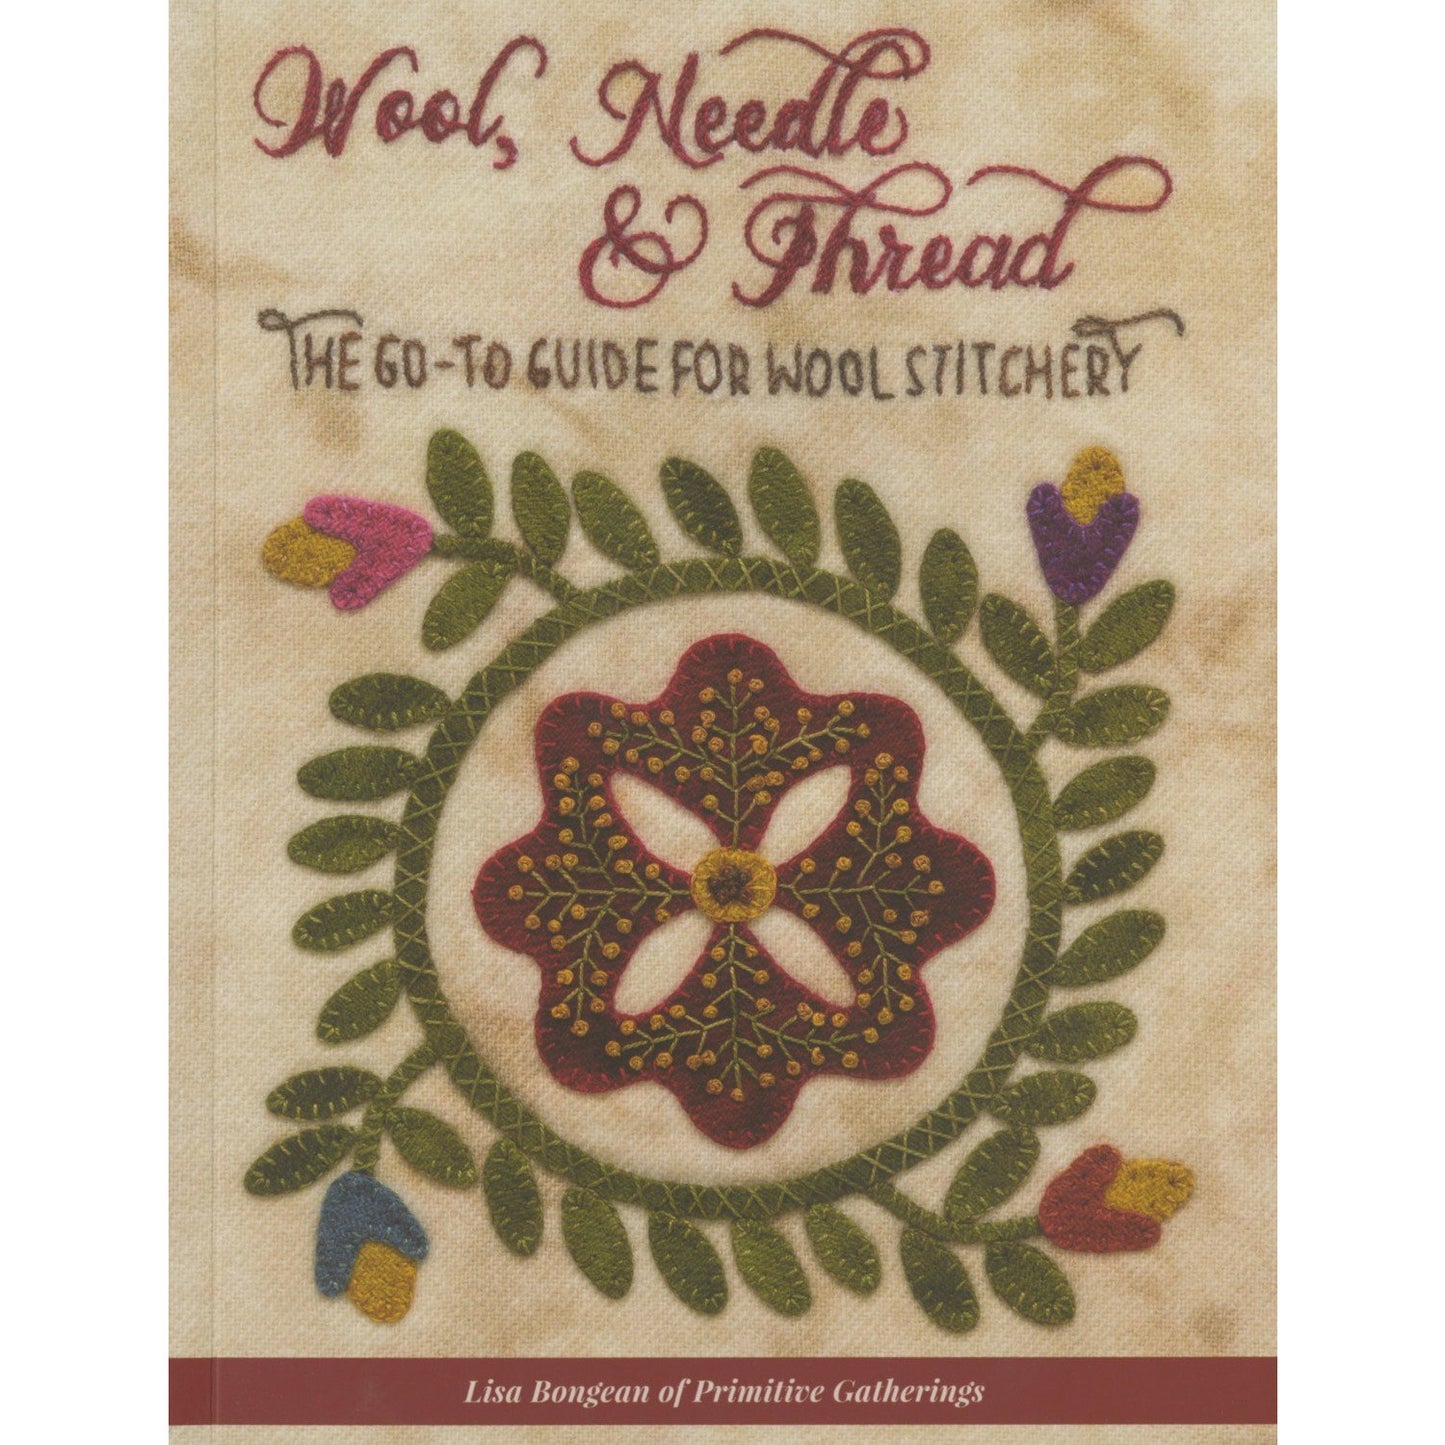 Wool, Needle & Thread ~ The Go-To Guide for Wool Stitchery